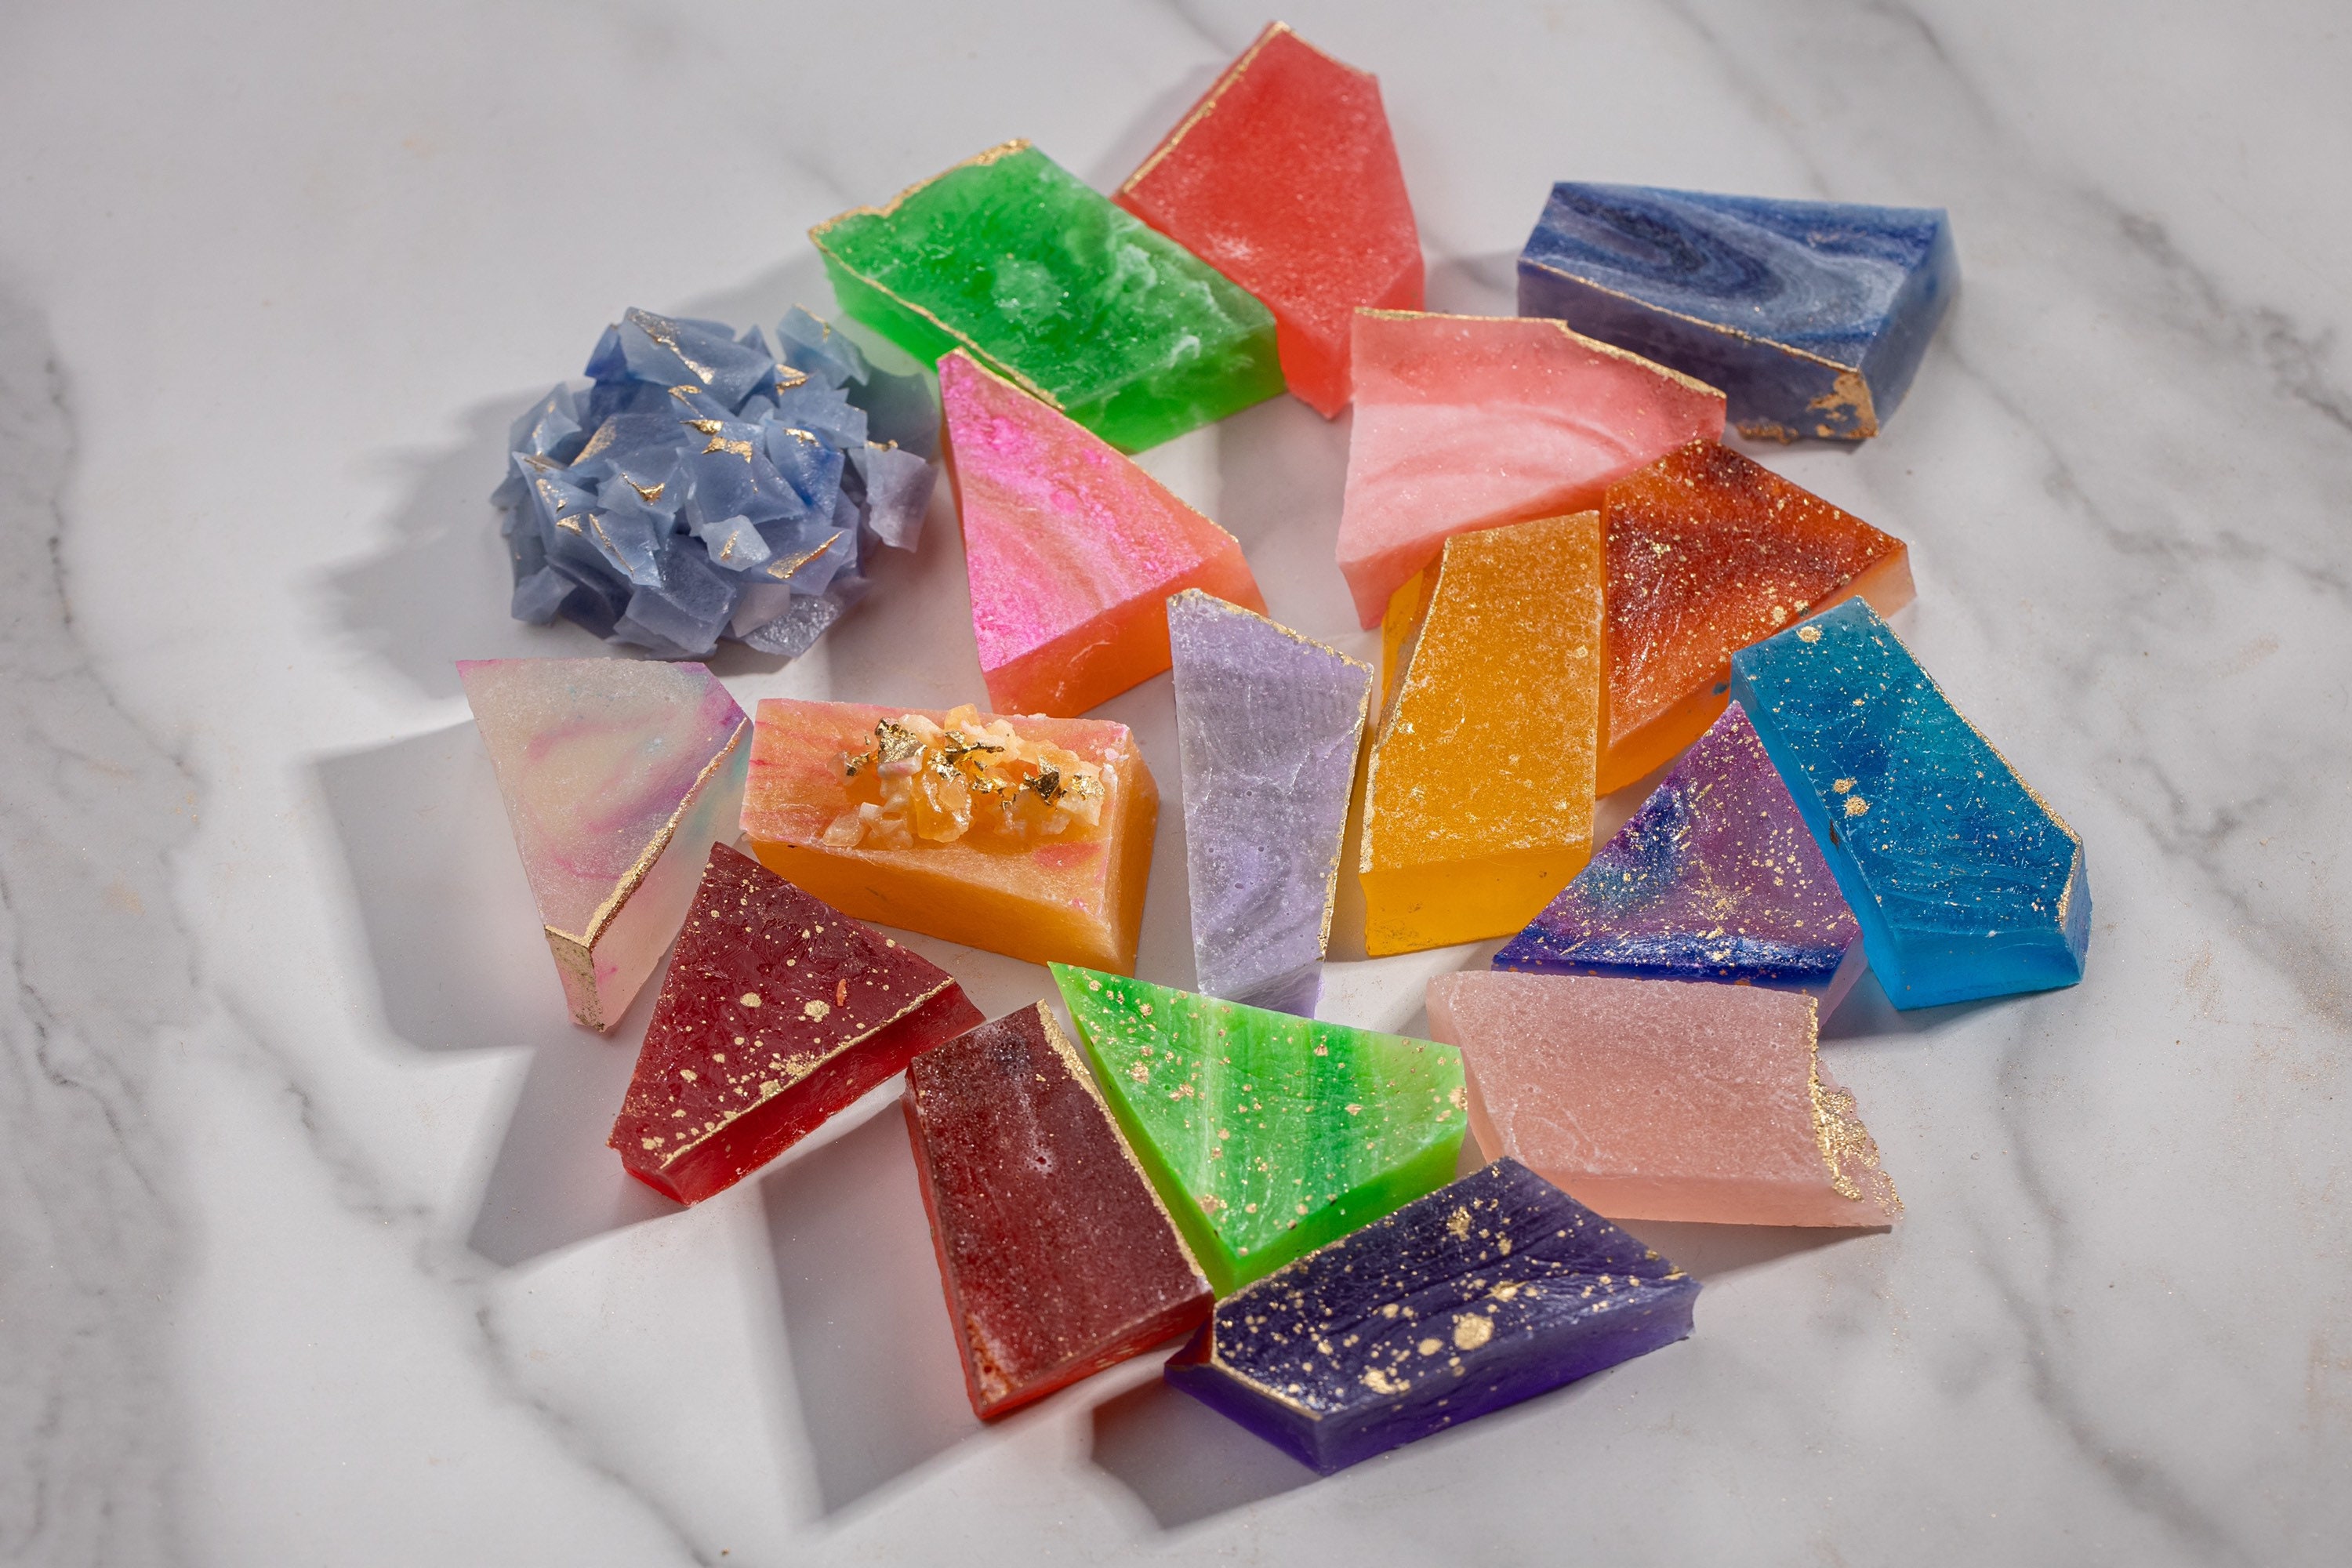 Pieces of Bling, Handmade Crystal Candy, Kohakutou, Vegan Candy,  Gluten-free Candy, ASMR Candy 